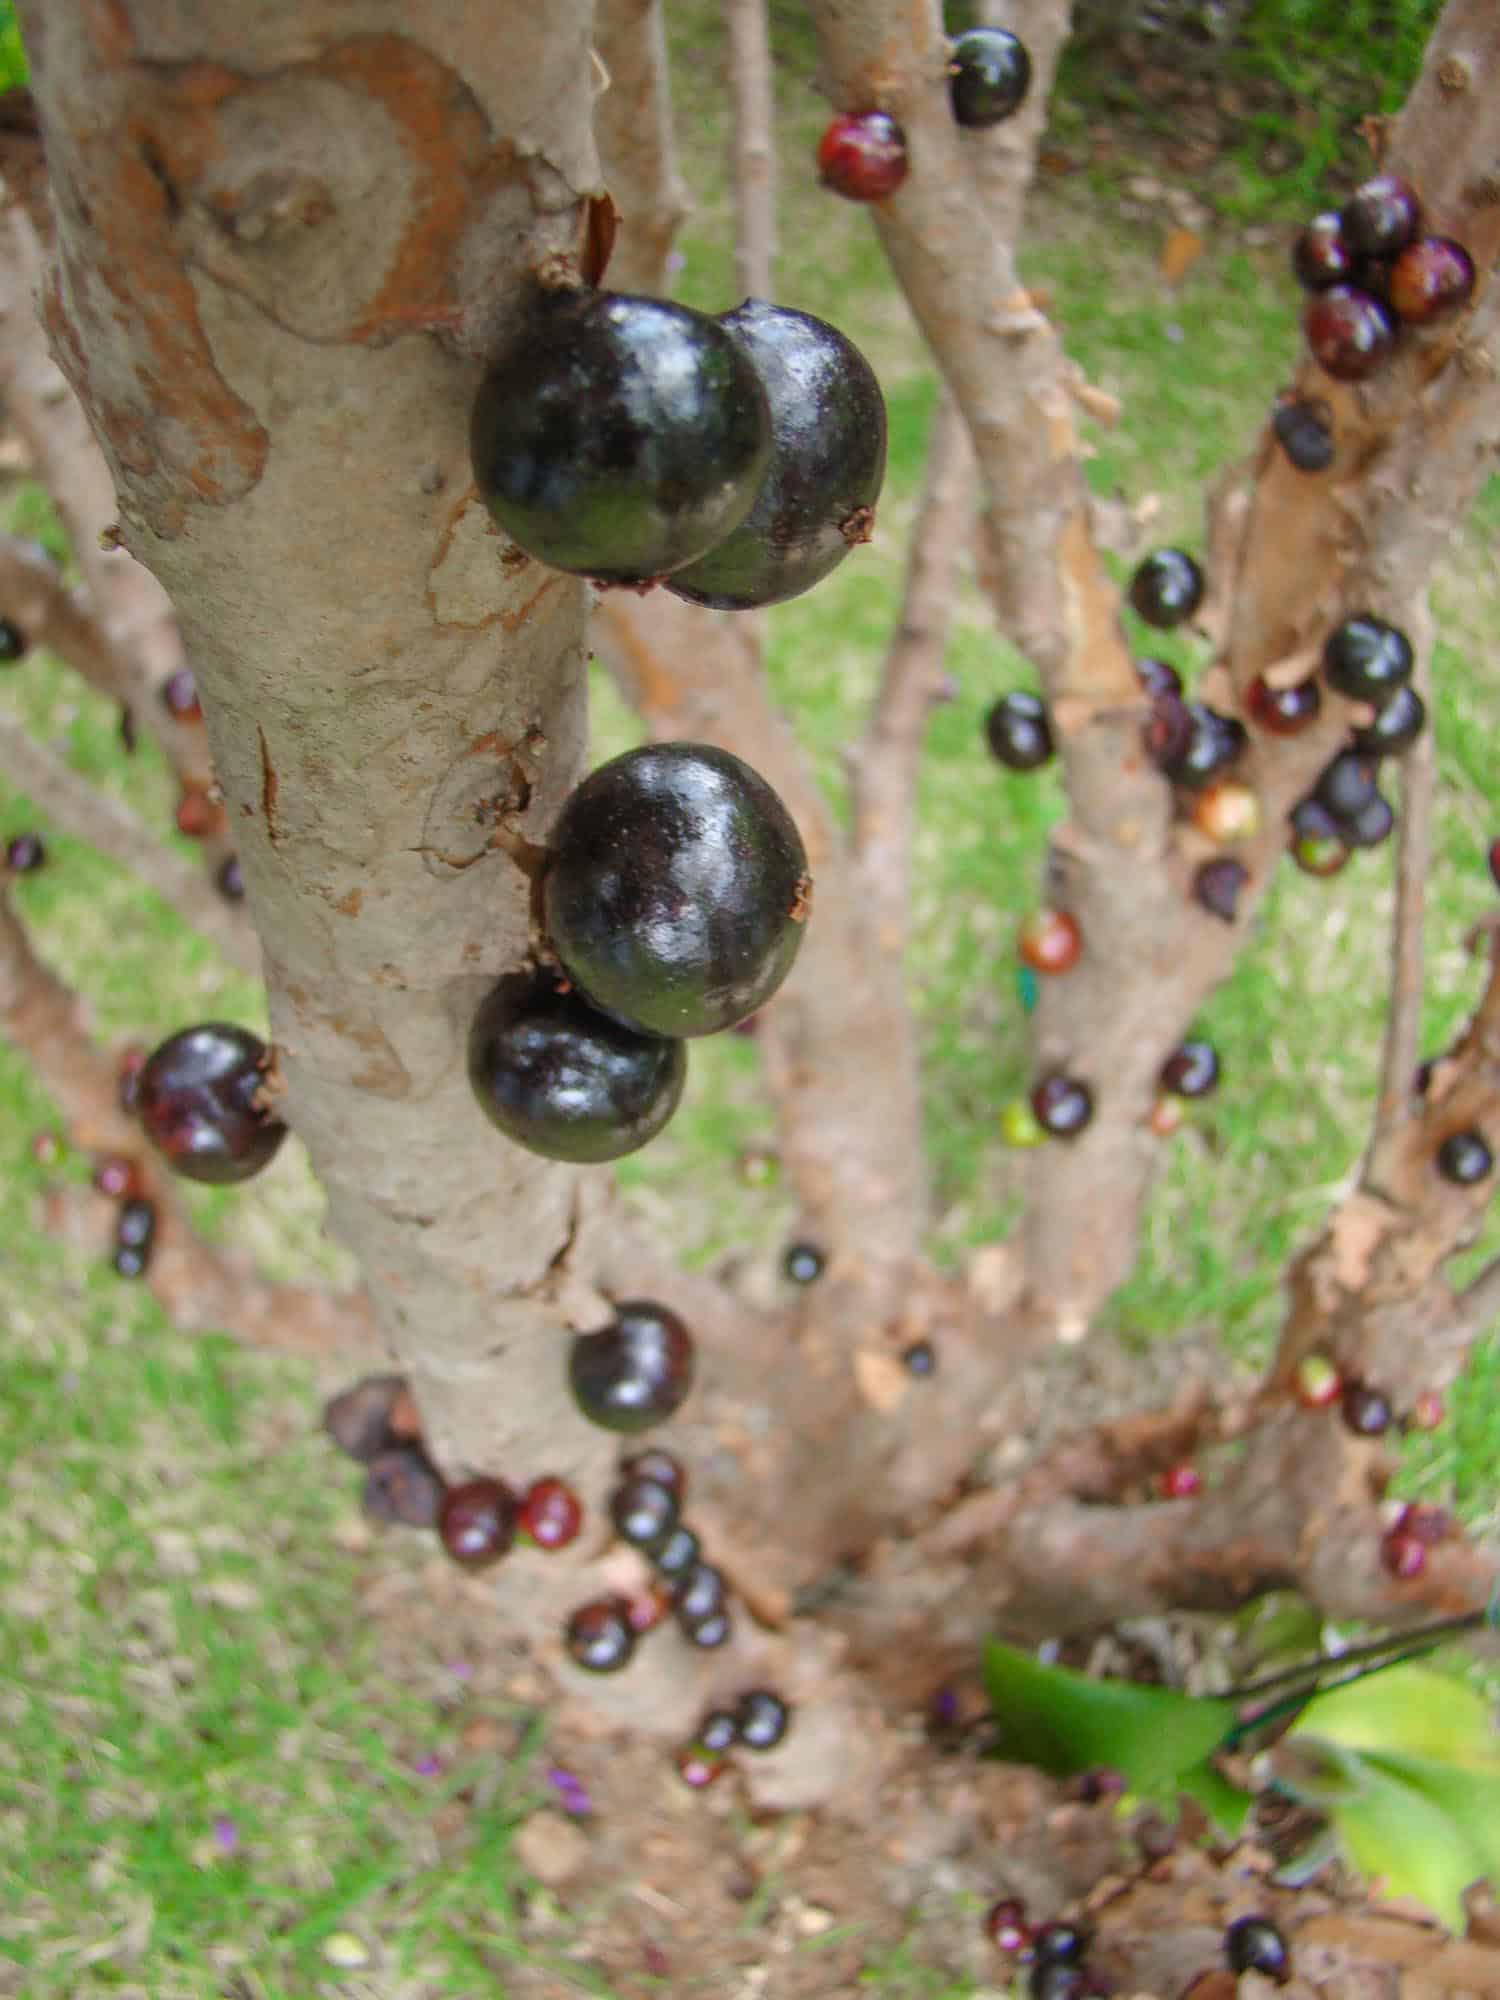 Jabuticaba is one of the most common exotic fruits in the world. You can find it in Brazil, Argentina, Paraguay, Peru and Bolivia.